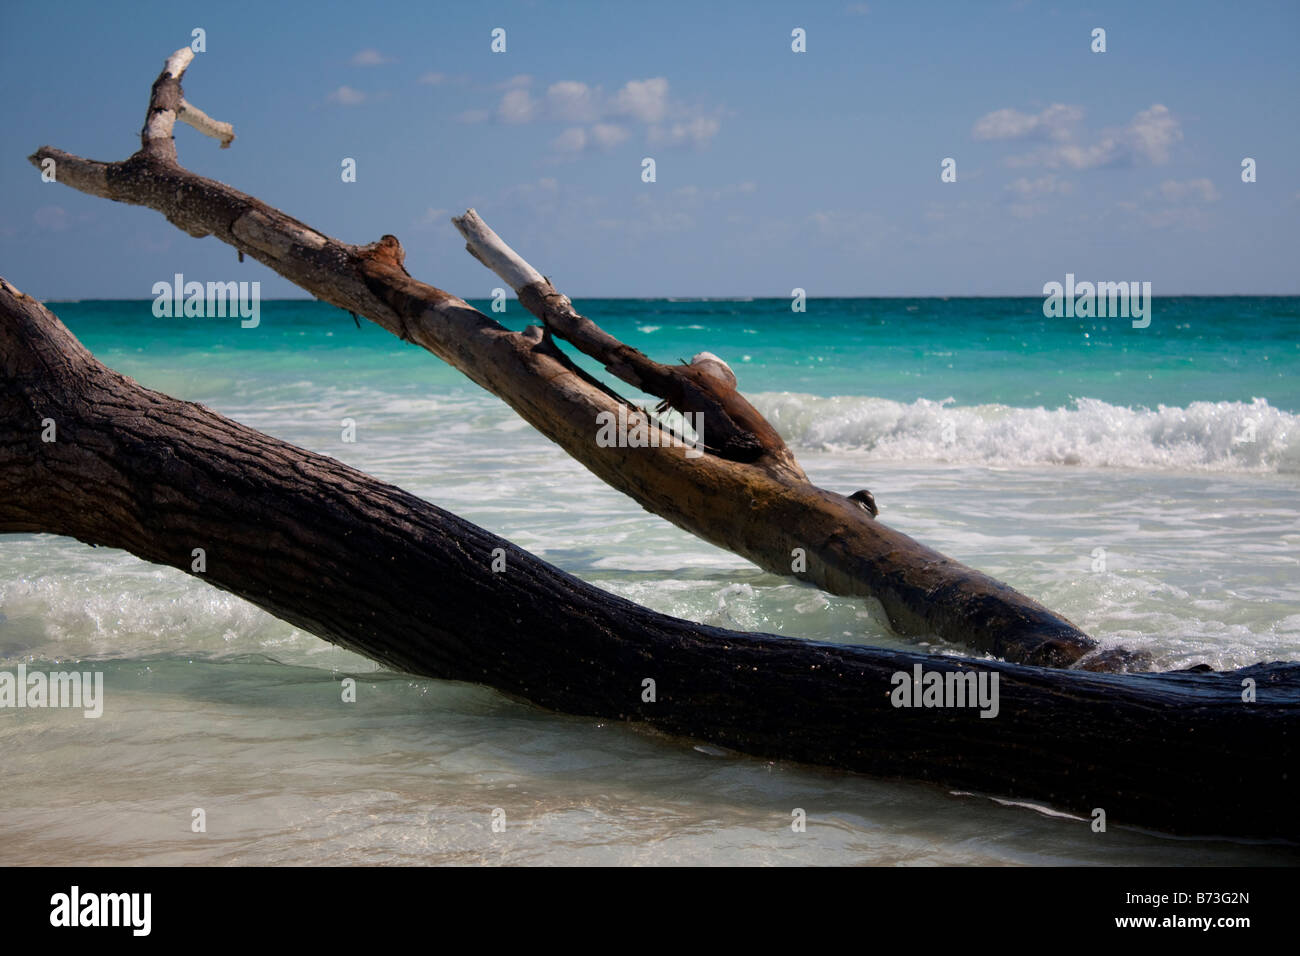 Driftwood on the beach in Tulum, Mexico Stock Photo